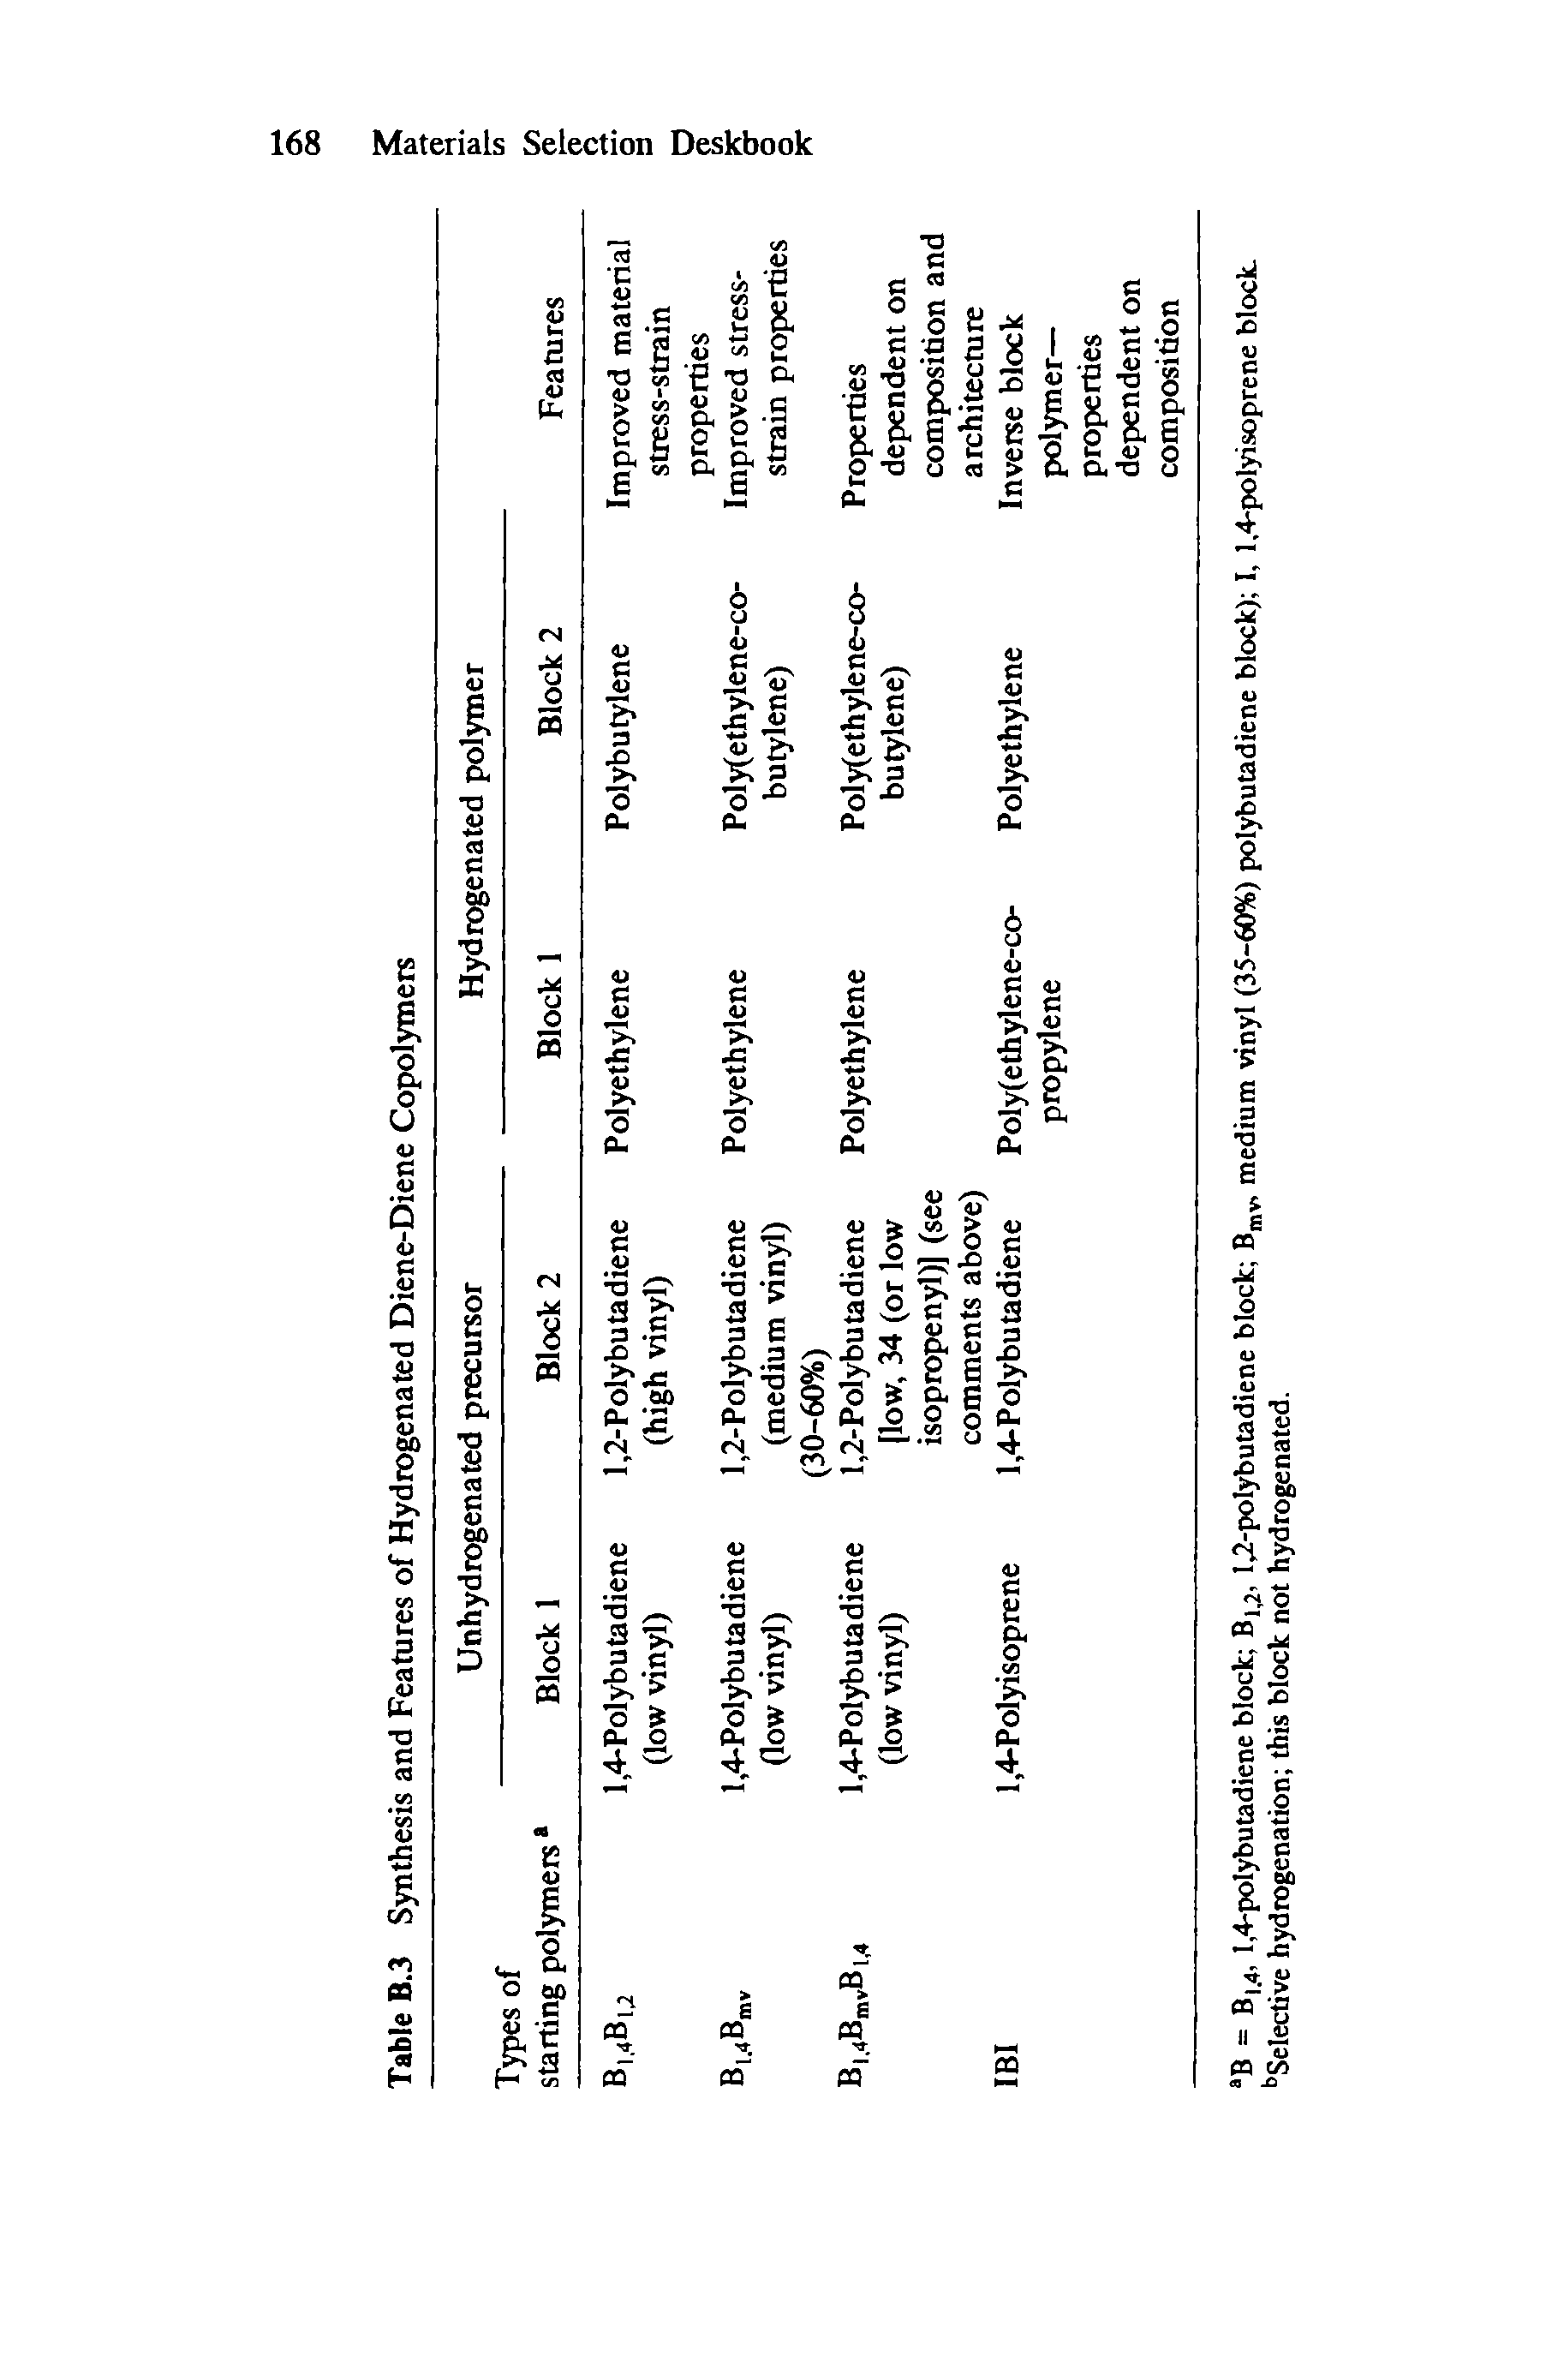 Table B.3 Synthesis and Features of Hydrogenated Diene-Diene Copolymers...